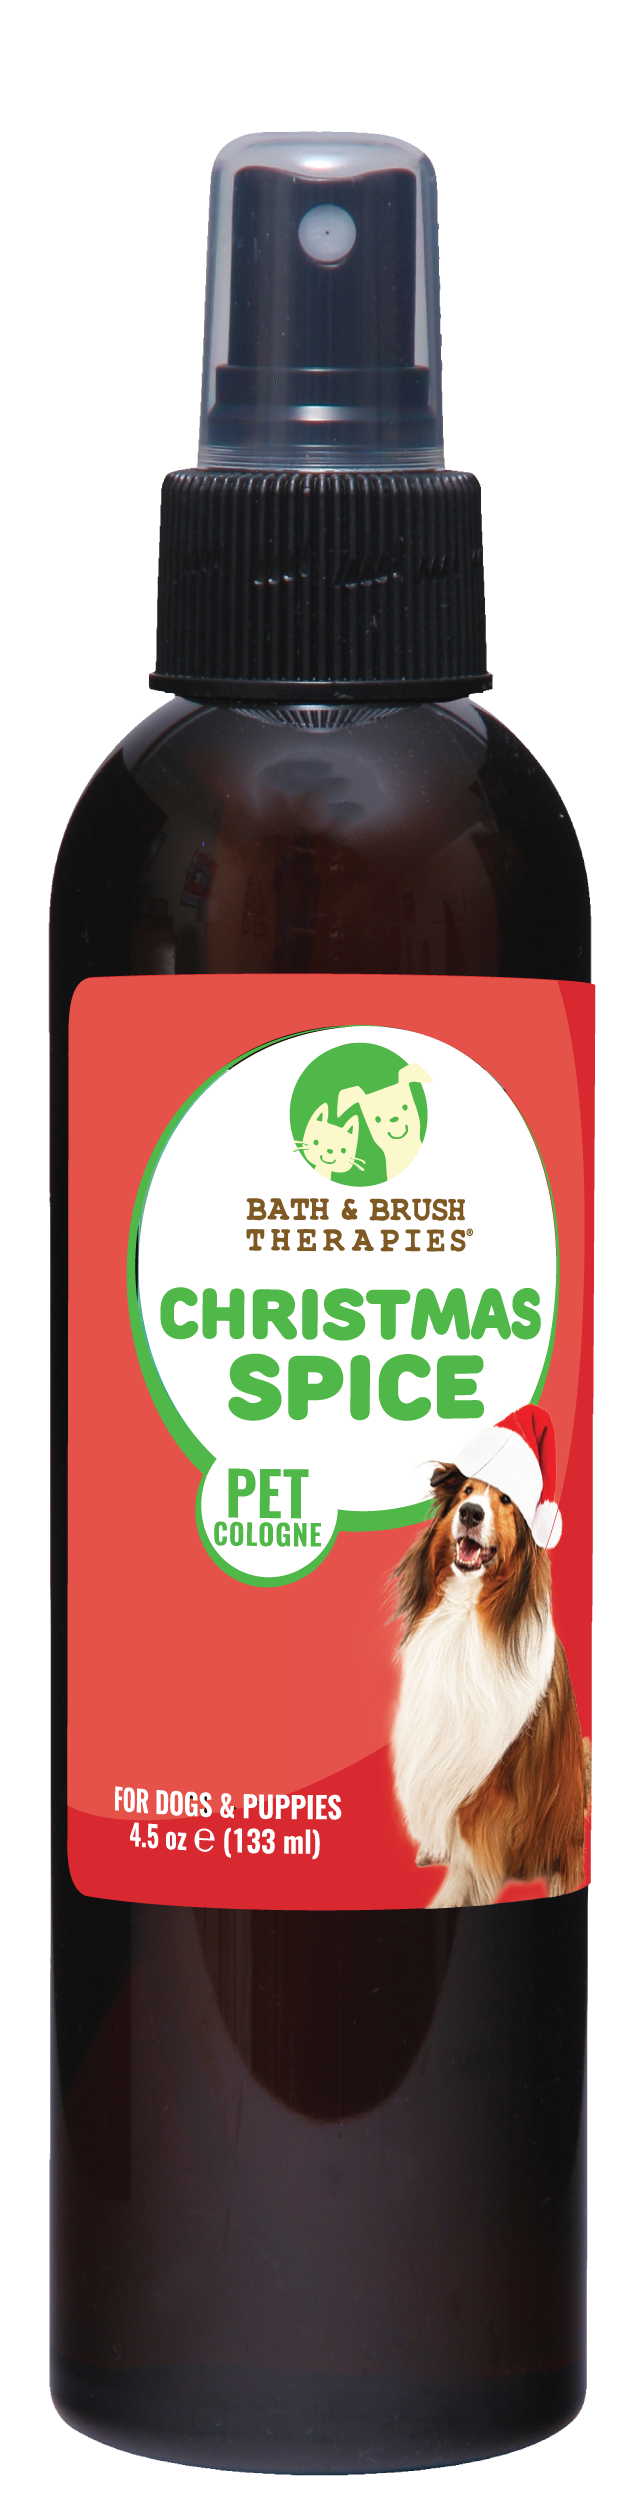 Christmas Spice Pet Cologne | Bath & Brush Therapies®